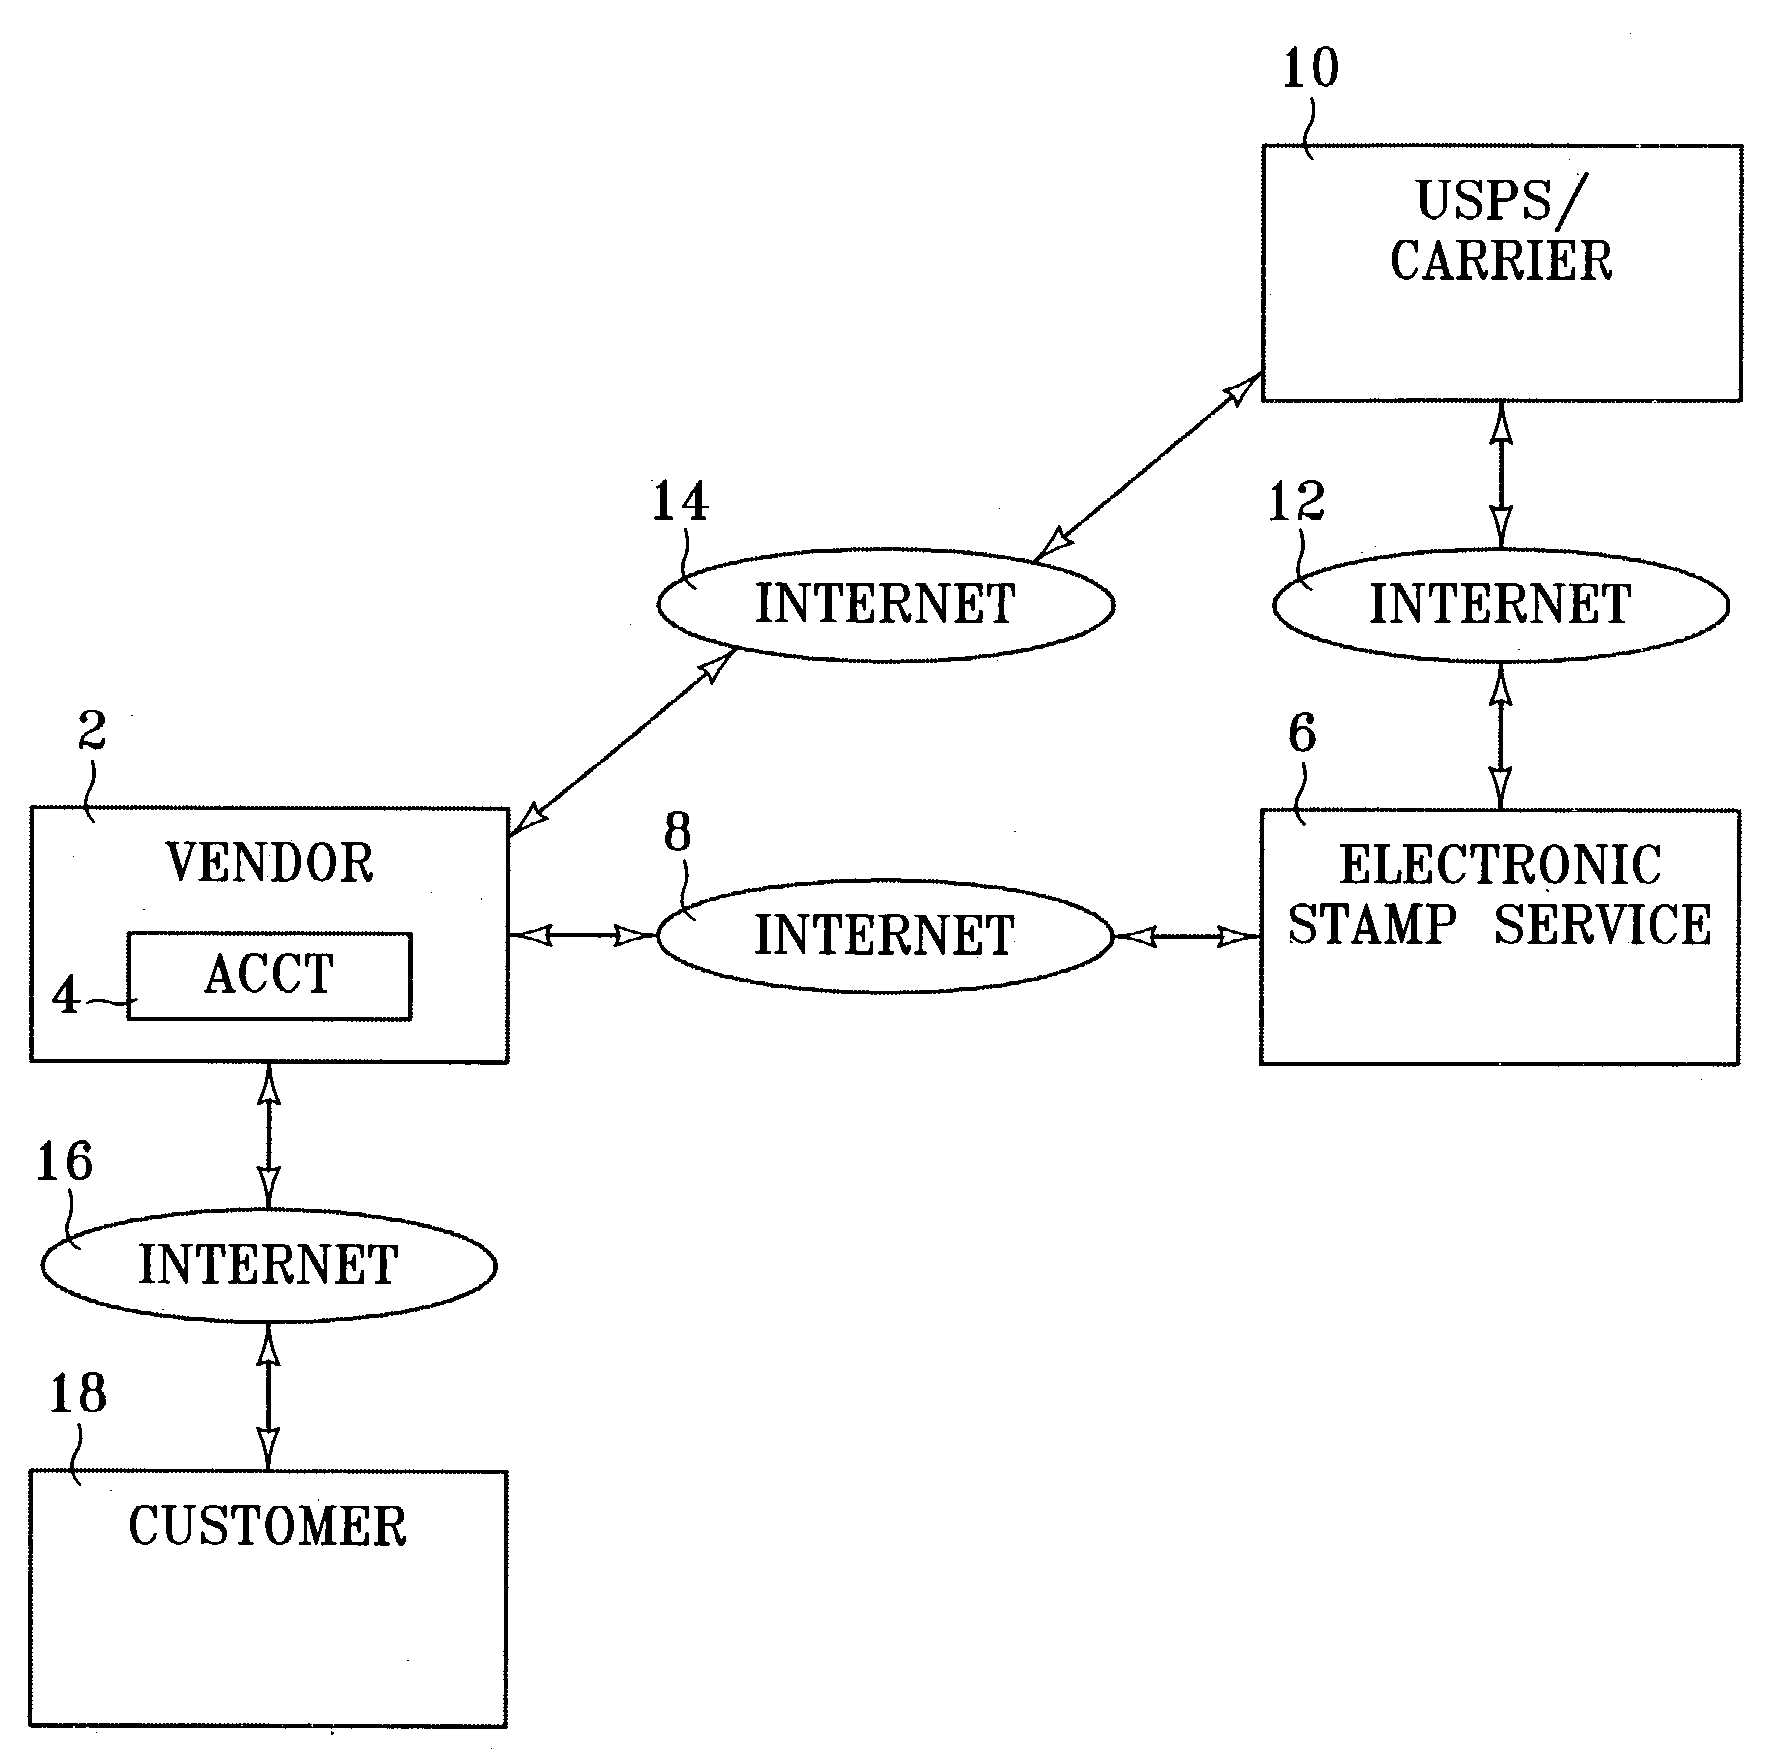 Method and apparatus for enabling third party utilization of postage account